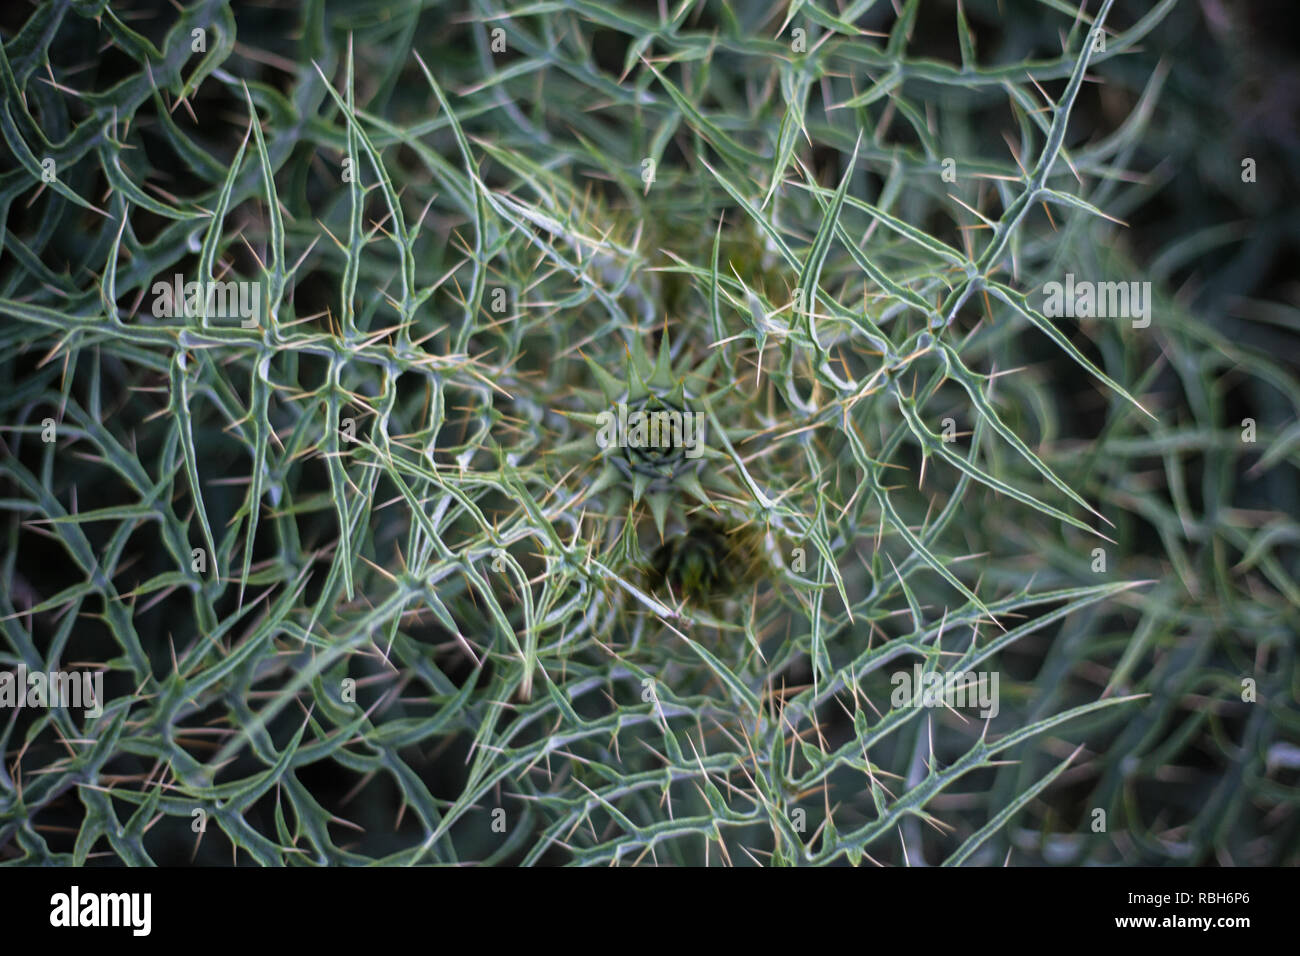 Cactus Plant Spreading its Prickles, Spikes and Thistles. Green Thorny Bush Closeup Top View Shot. Seamless Details of Sharp and Pointed Stems and Lea Stock Photo